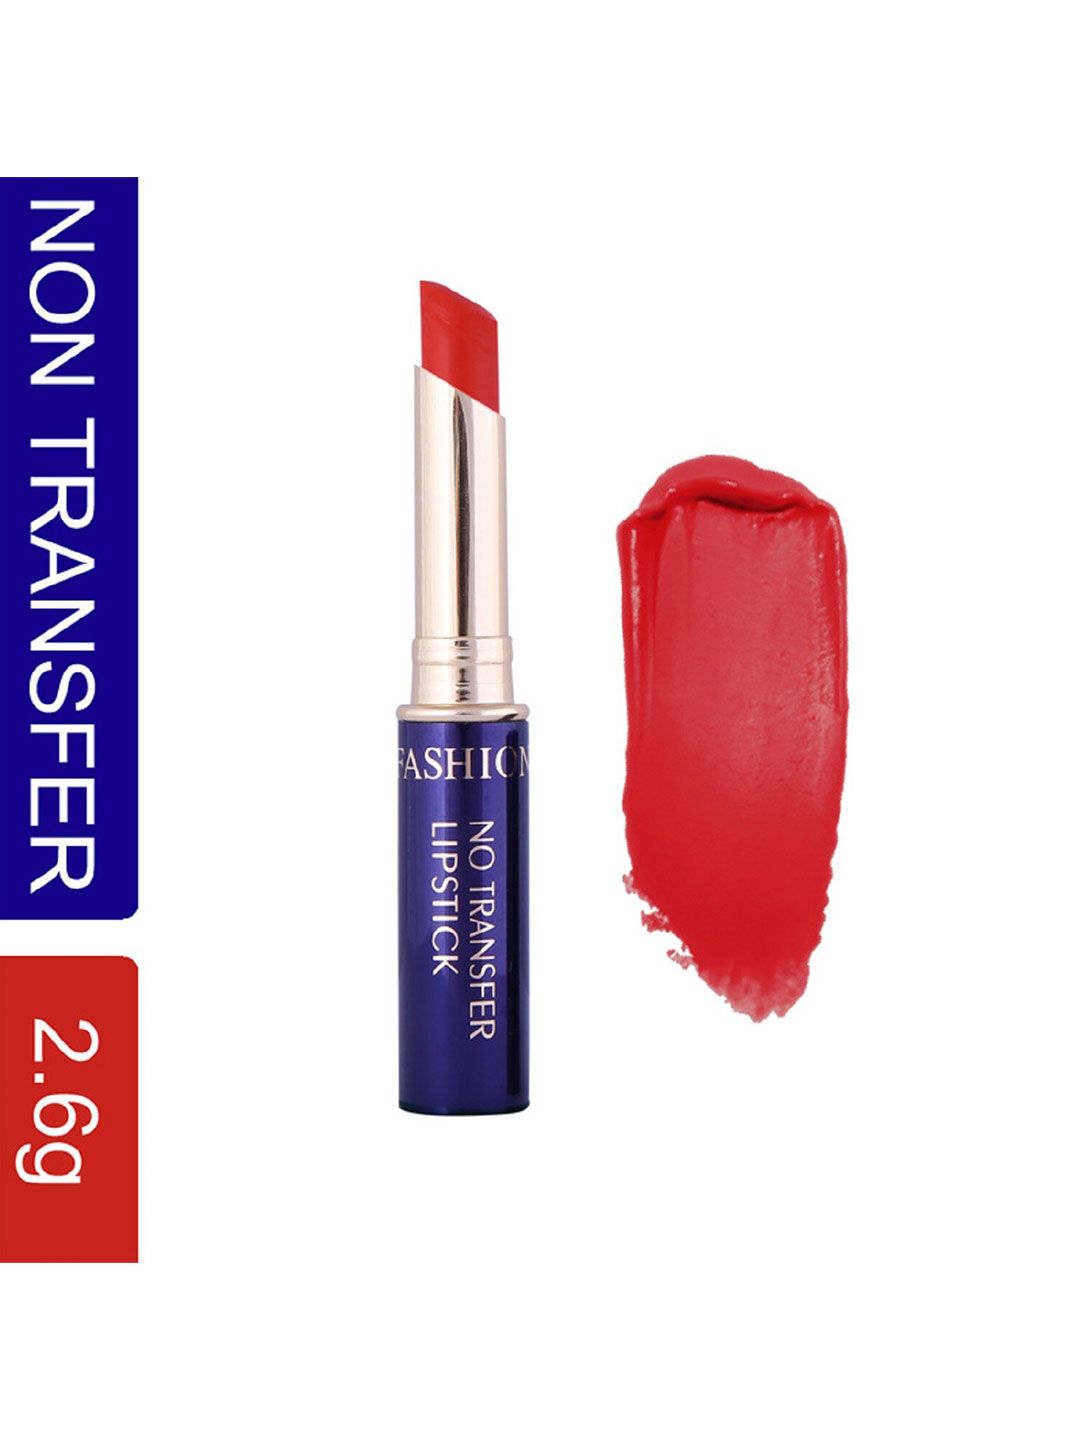 Fashion Colour No Transfer Matte Waterproof Lipstick 2.6 g - Deep Red 20 Price in India